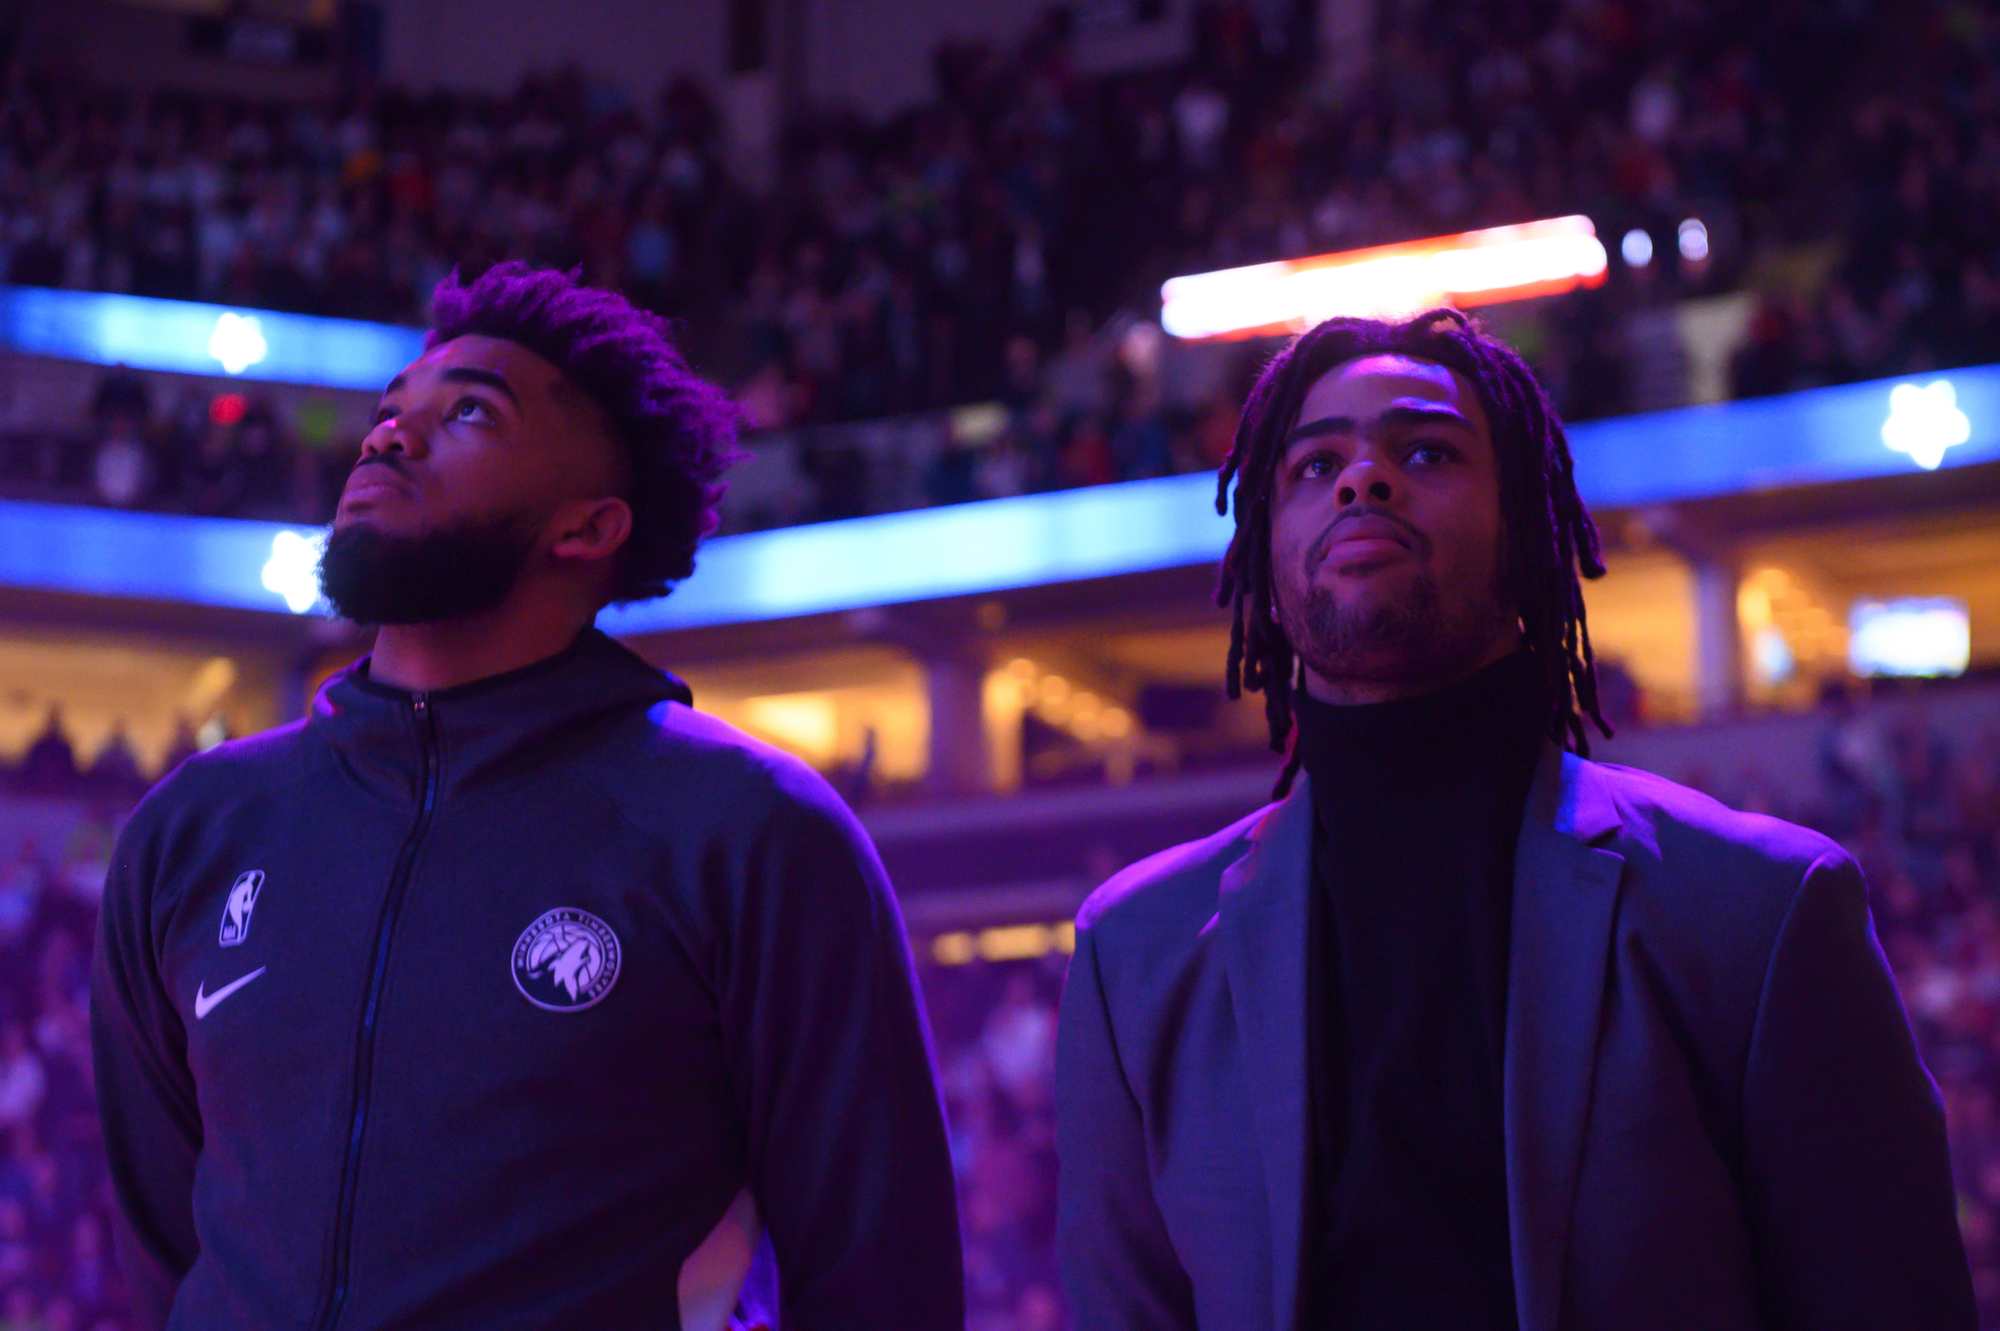 Karl-Anthony Towns and guard D’Angelo Russell didn’t get to share the court, but they stood together for the national anthem before Saturday's game.